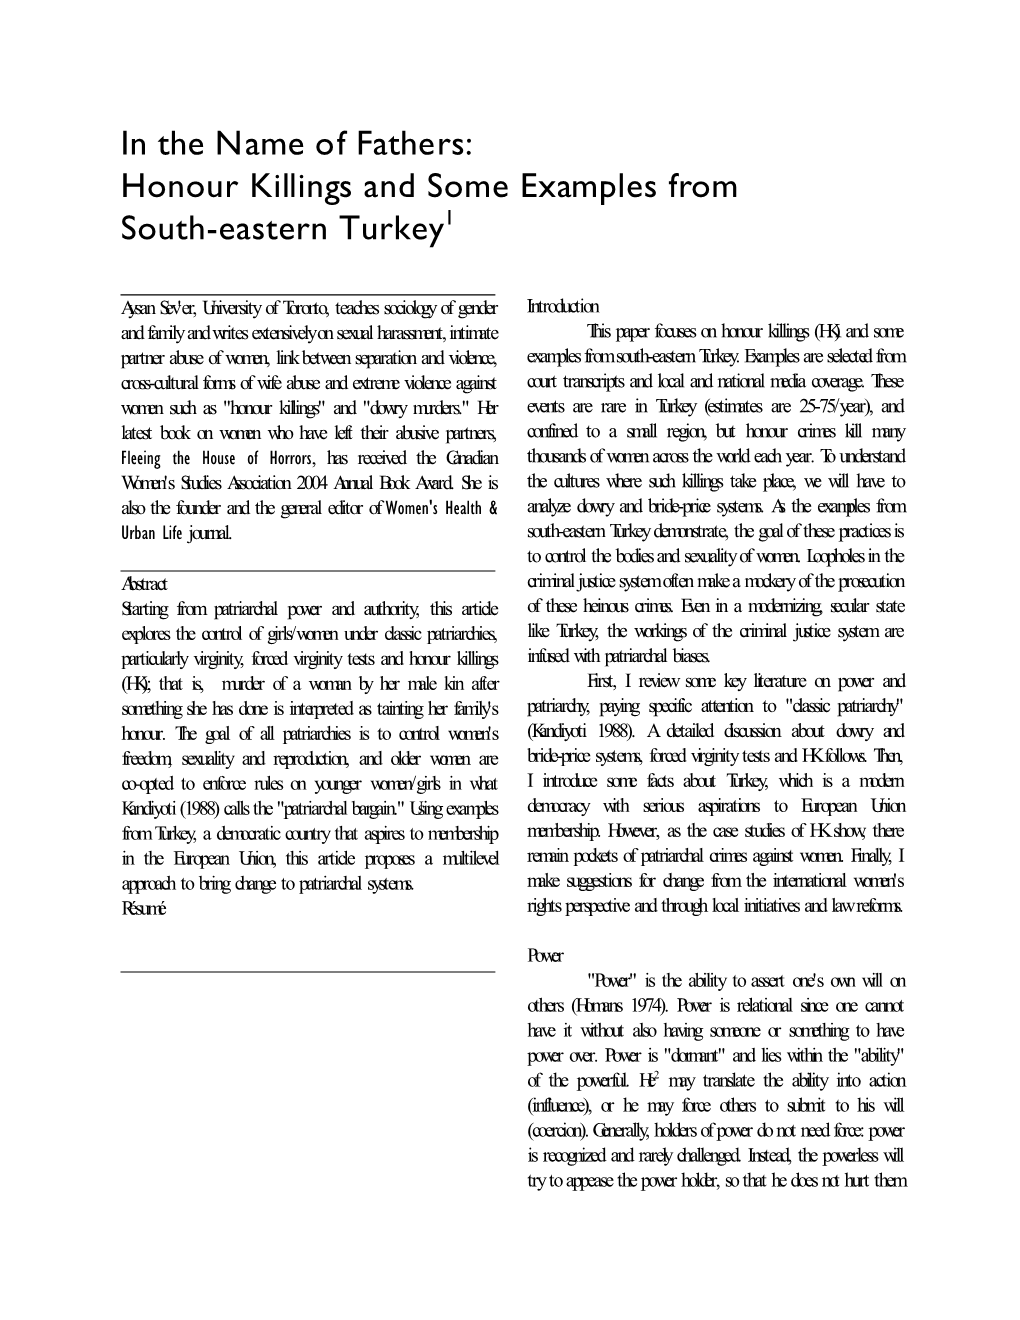 Honour Killings and Some Examples from South-Eastern Turkey